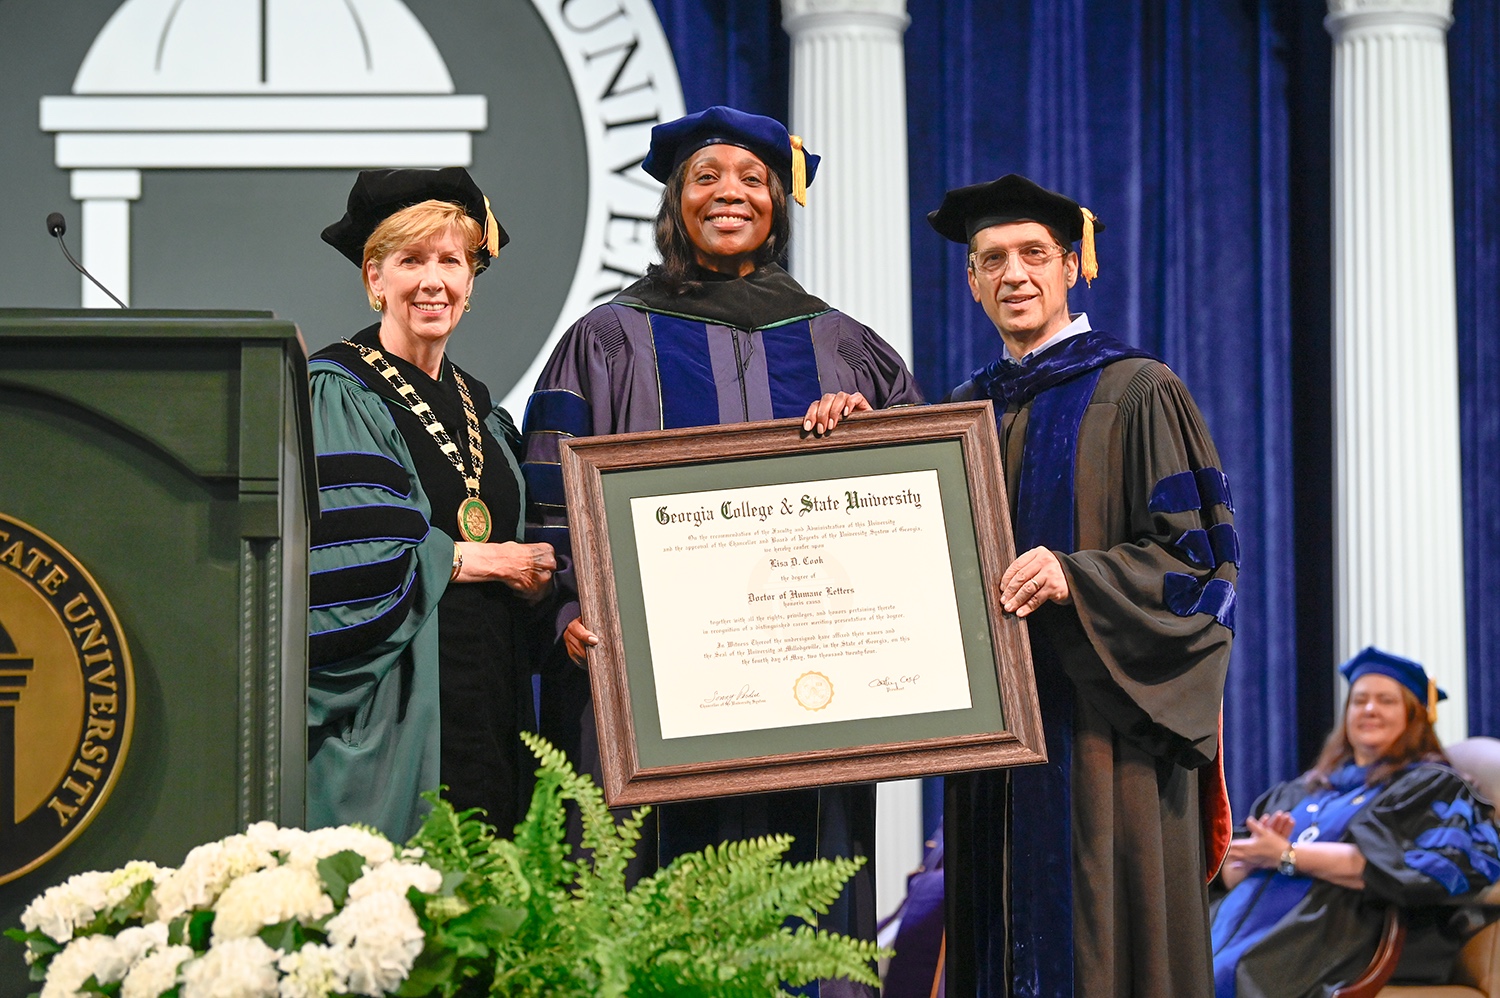 President Cathy Cox and Provost Costas Spirou present Governor Lisa Cook with an honorary degree from GCSU.